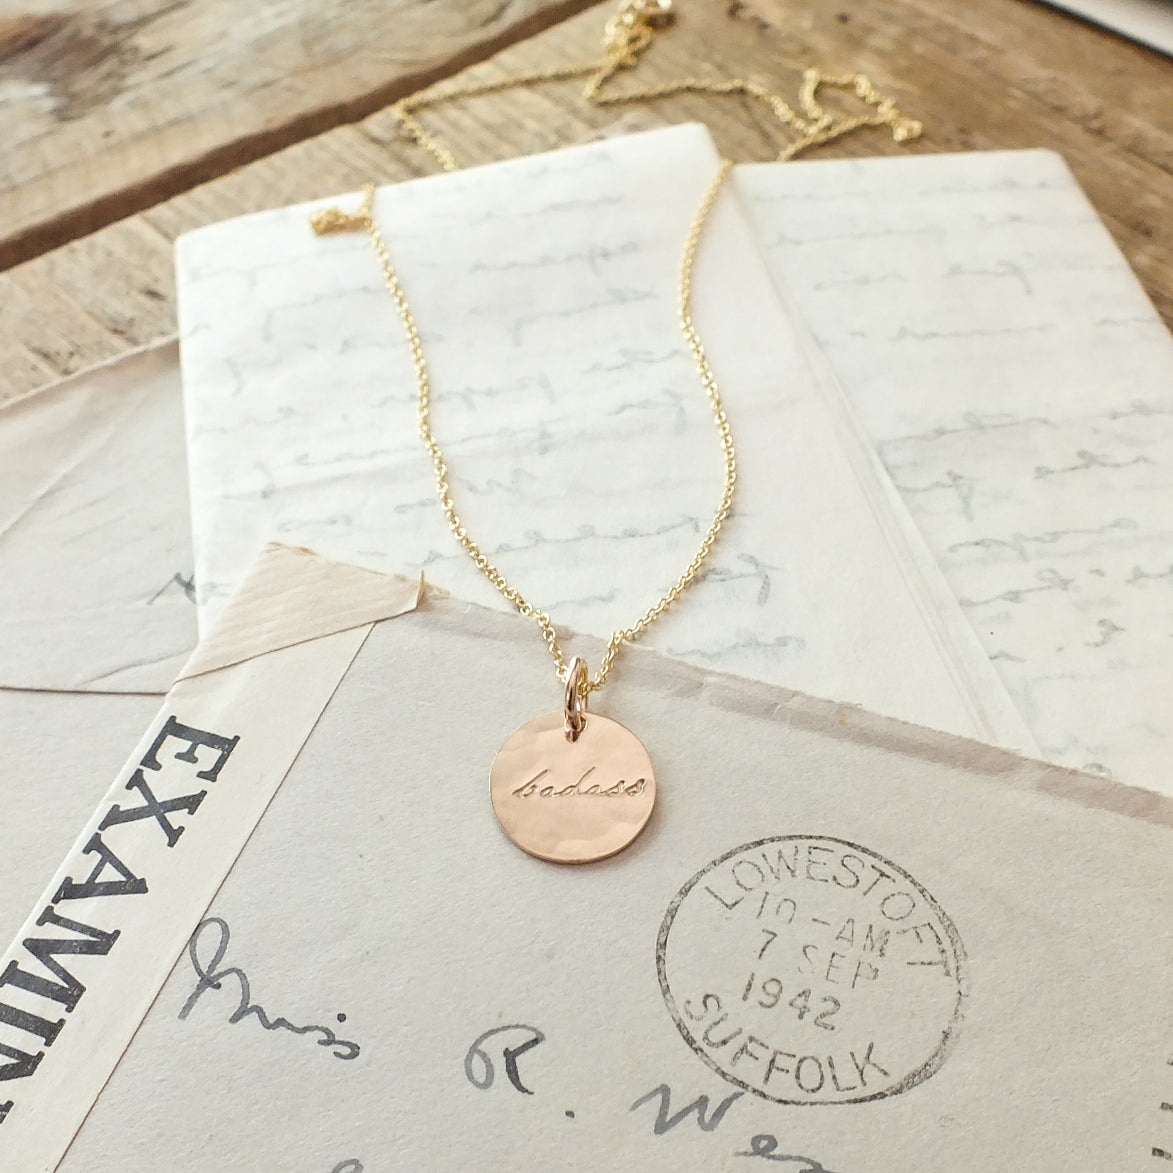 Badass Necklace by Becoming Jewelry displayed on vintage handwritten letters.